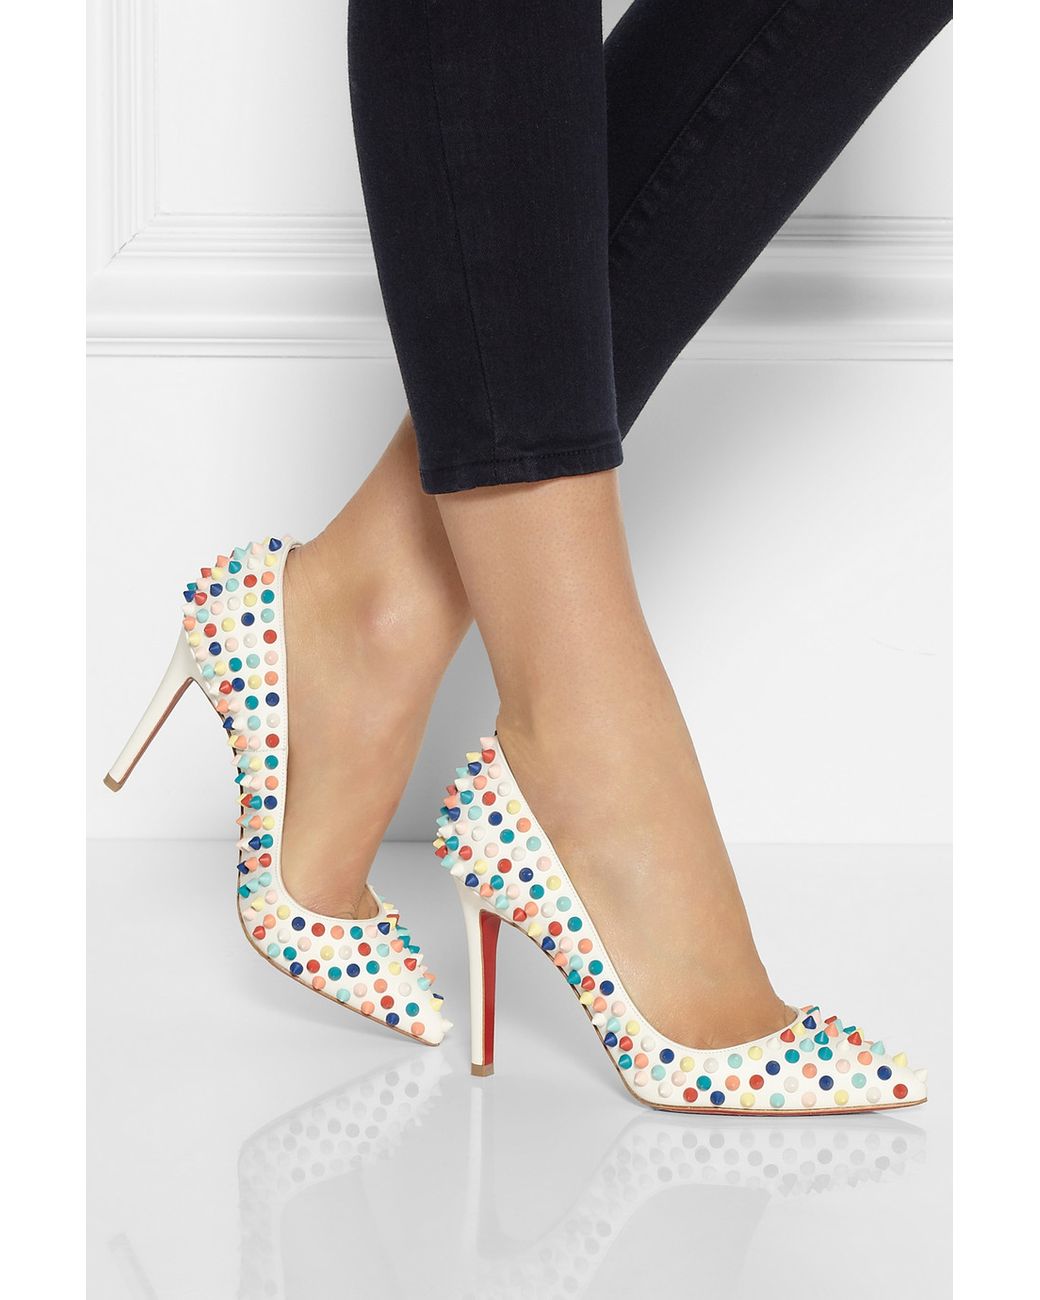 Christian Louboutin Pigalle Spikes 100 Leather Pumps in White | Lyst